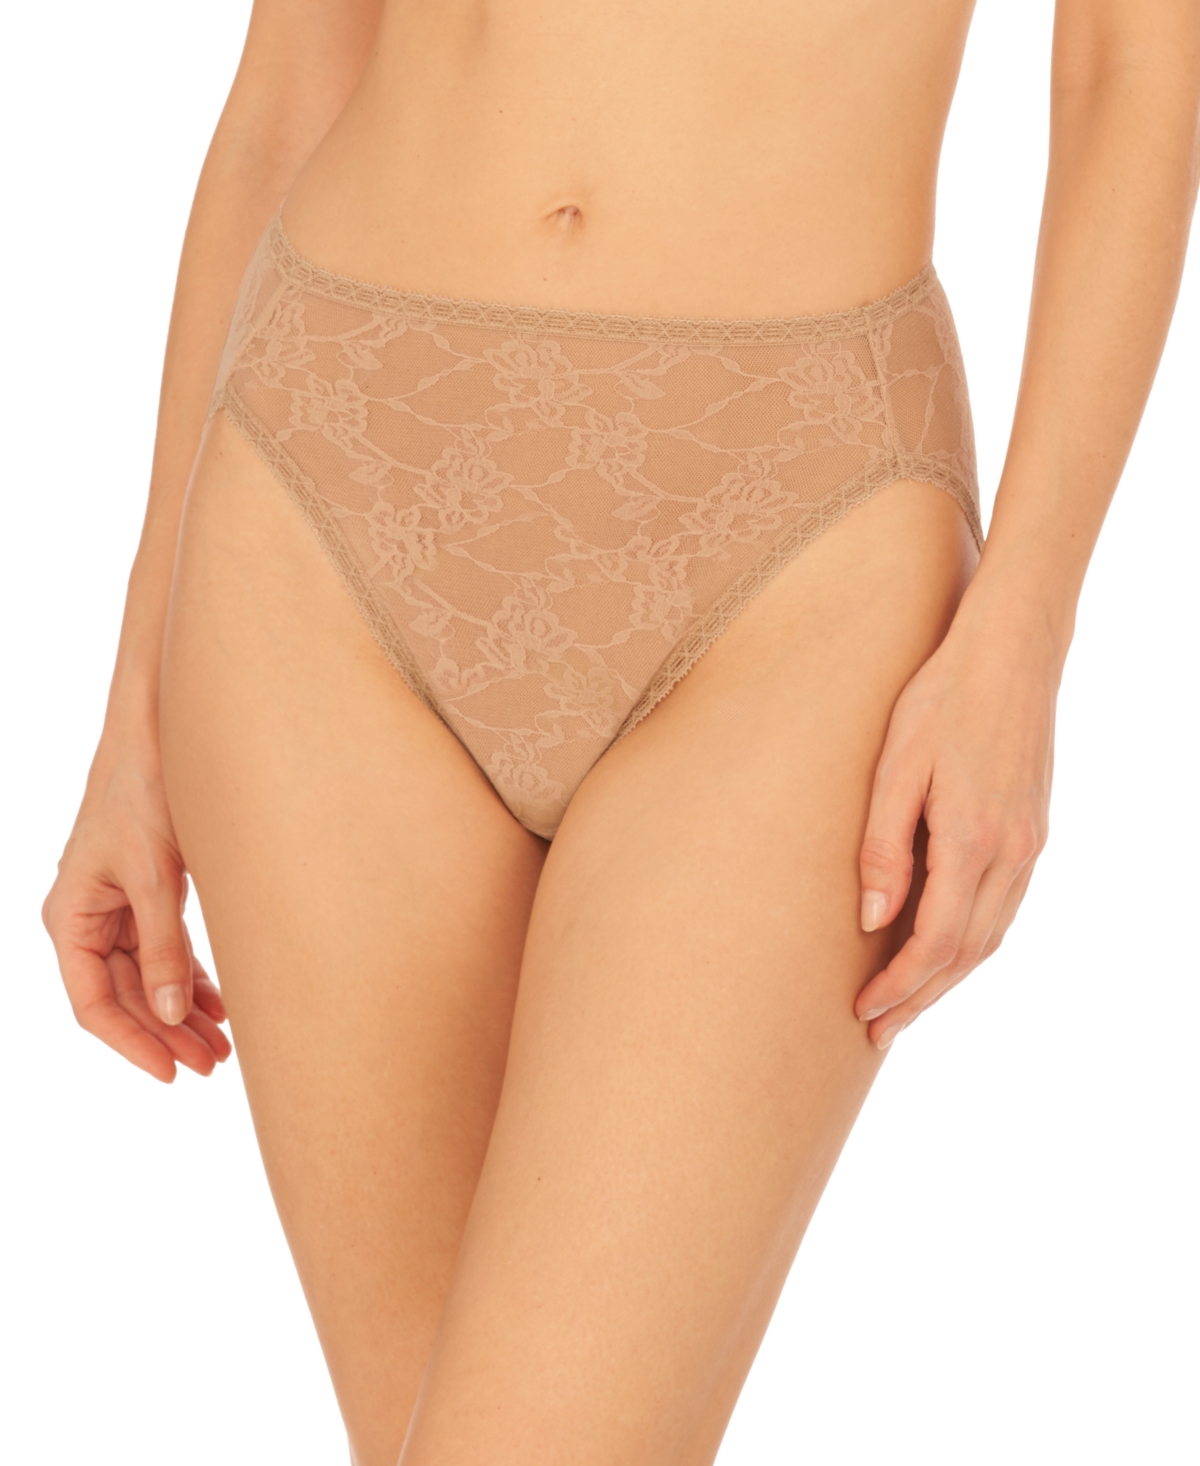 Women's Bliss Allure One Size Lace French Cut Underwear 772303 - Cafe